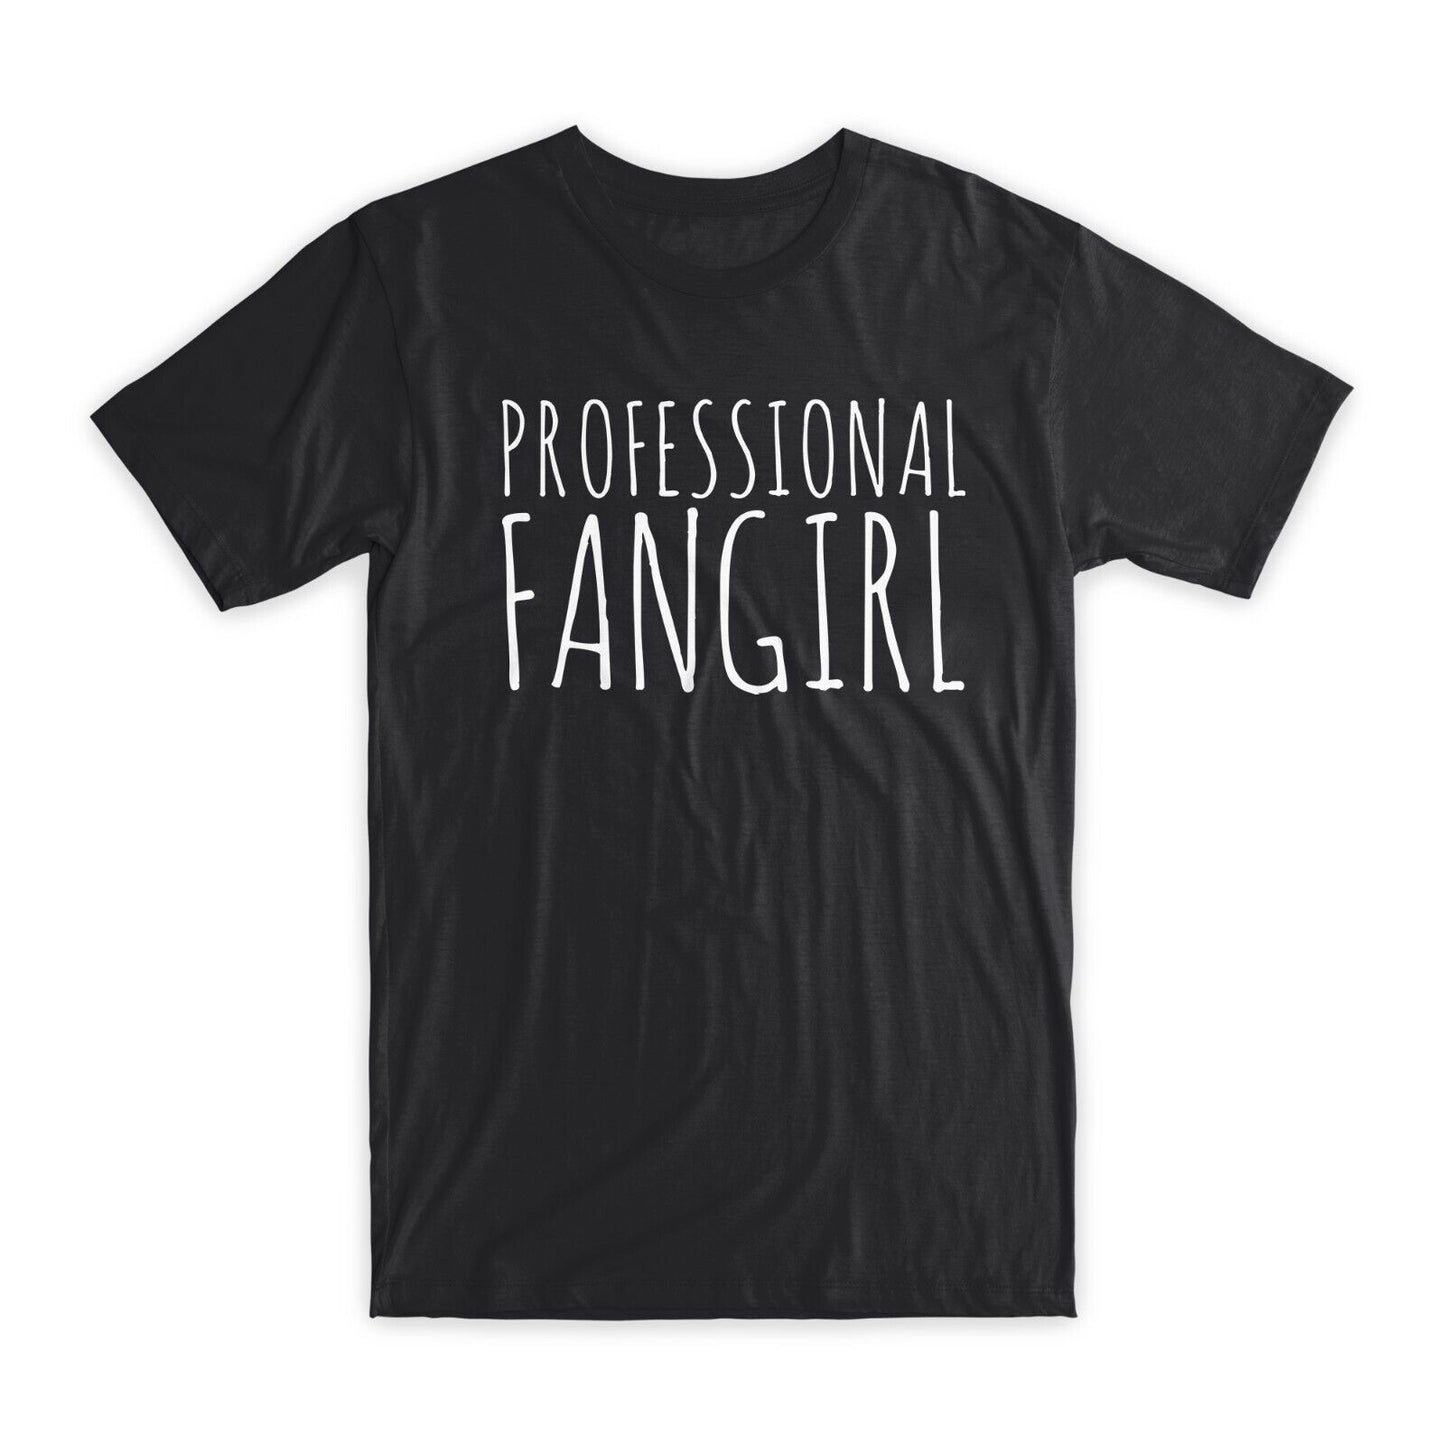 Professional Fangirl T-Shirt Premium Soft Cotton Crew Neck Funny Tees Gifts NEW